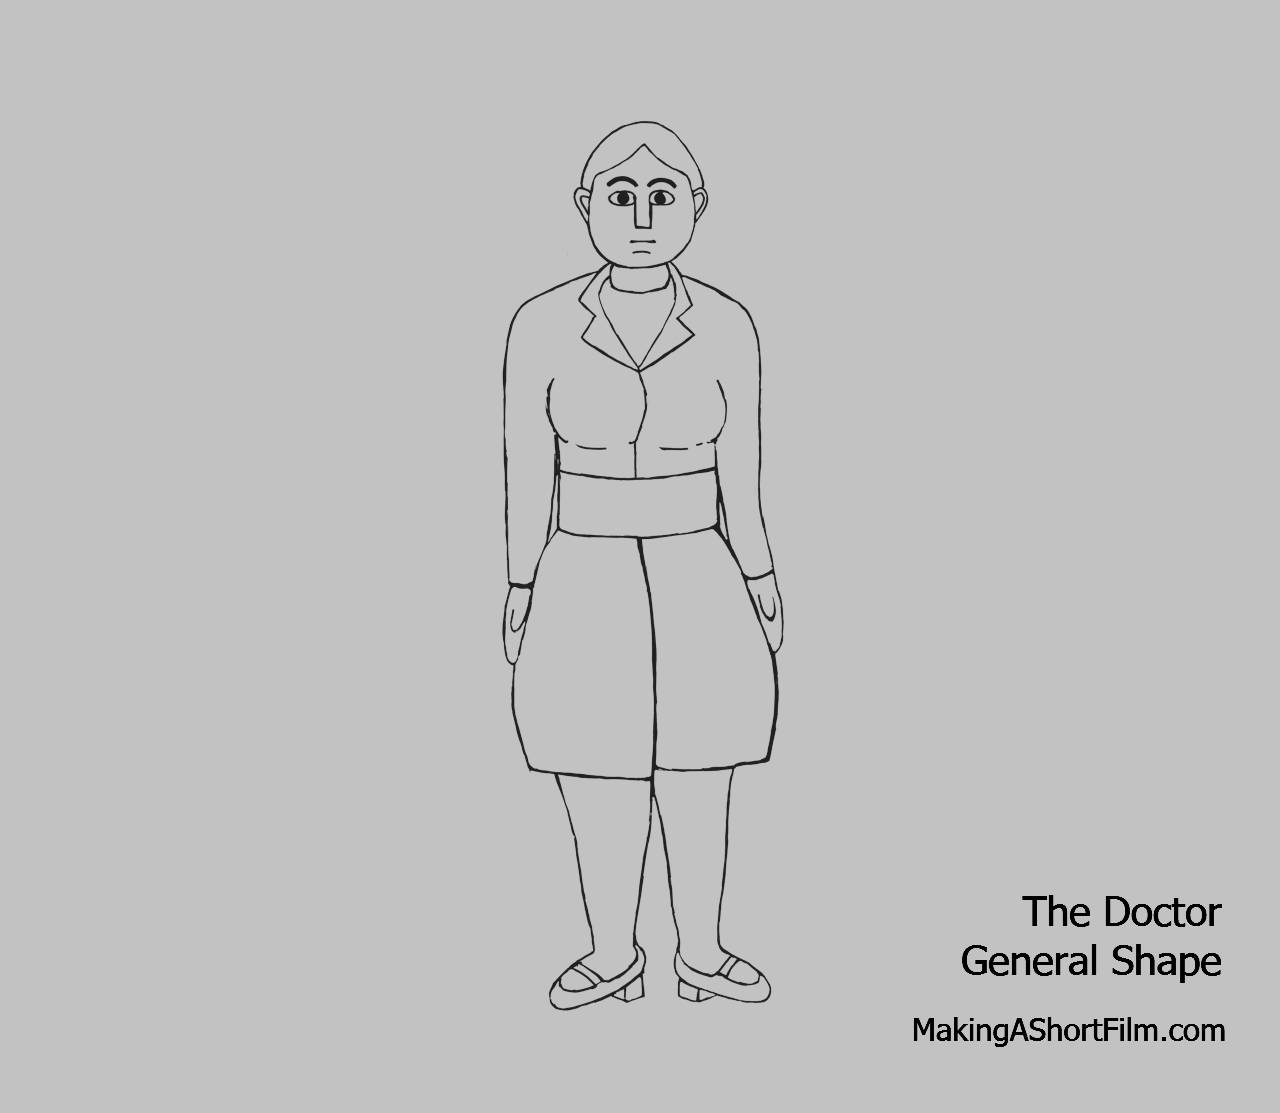 The general shape of the Doctor